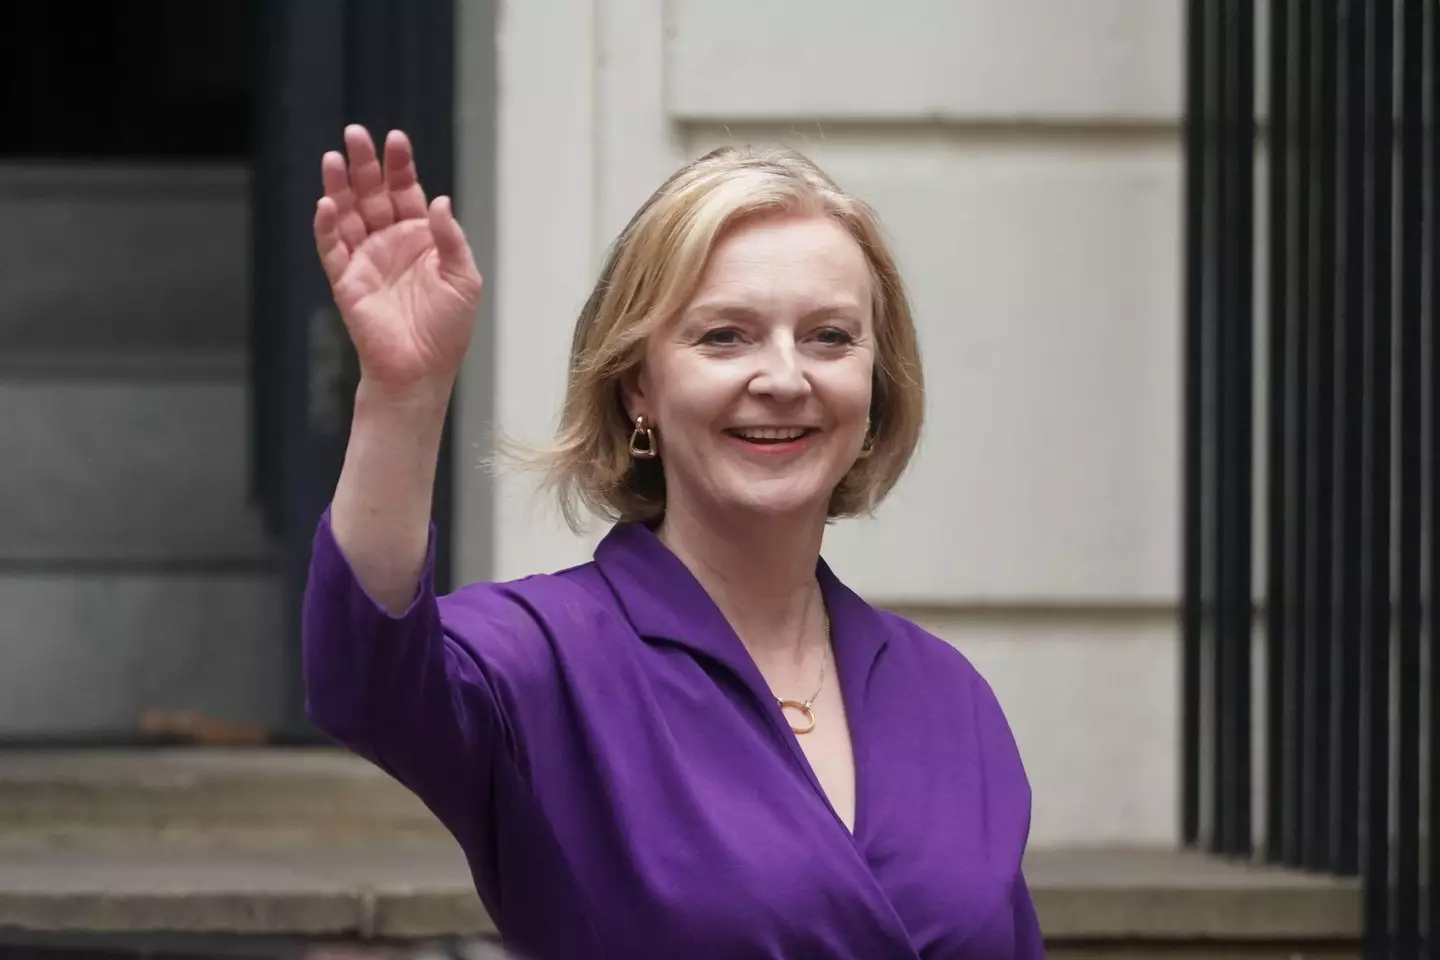 Some have accidentally been congratulating the wrong Liz Truss on Twitter.